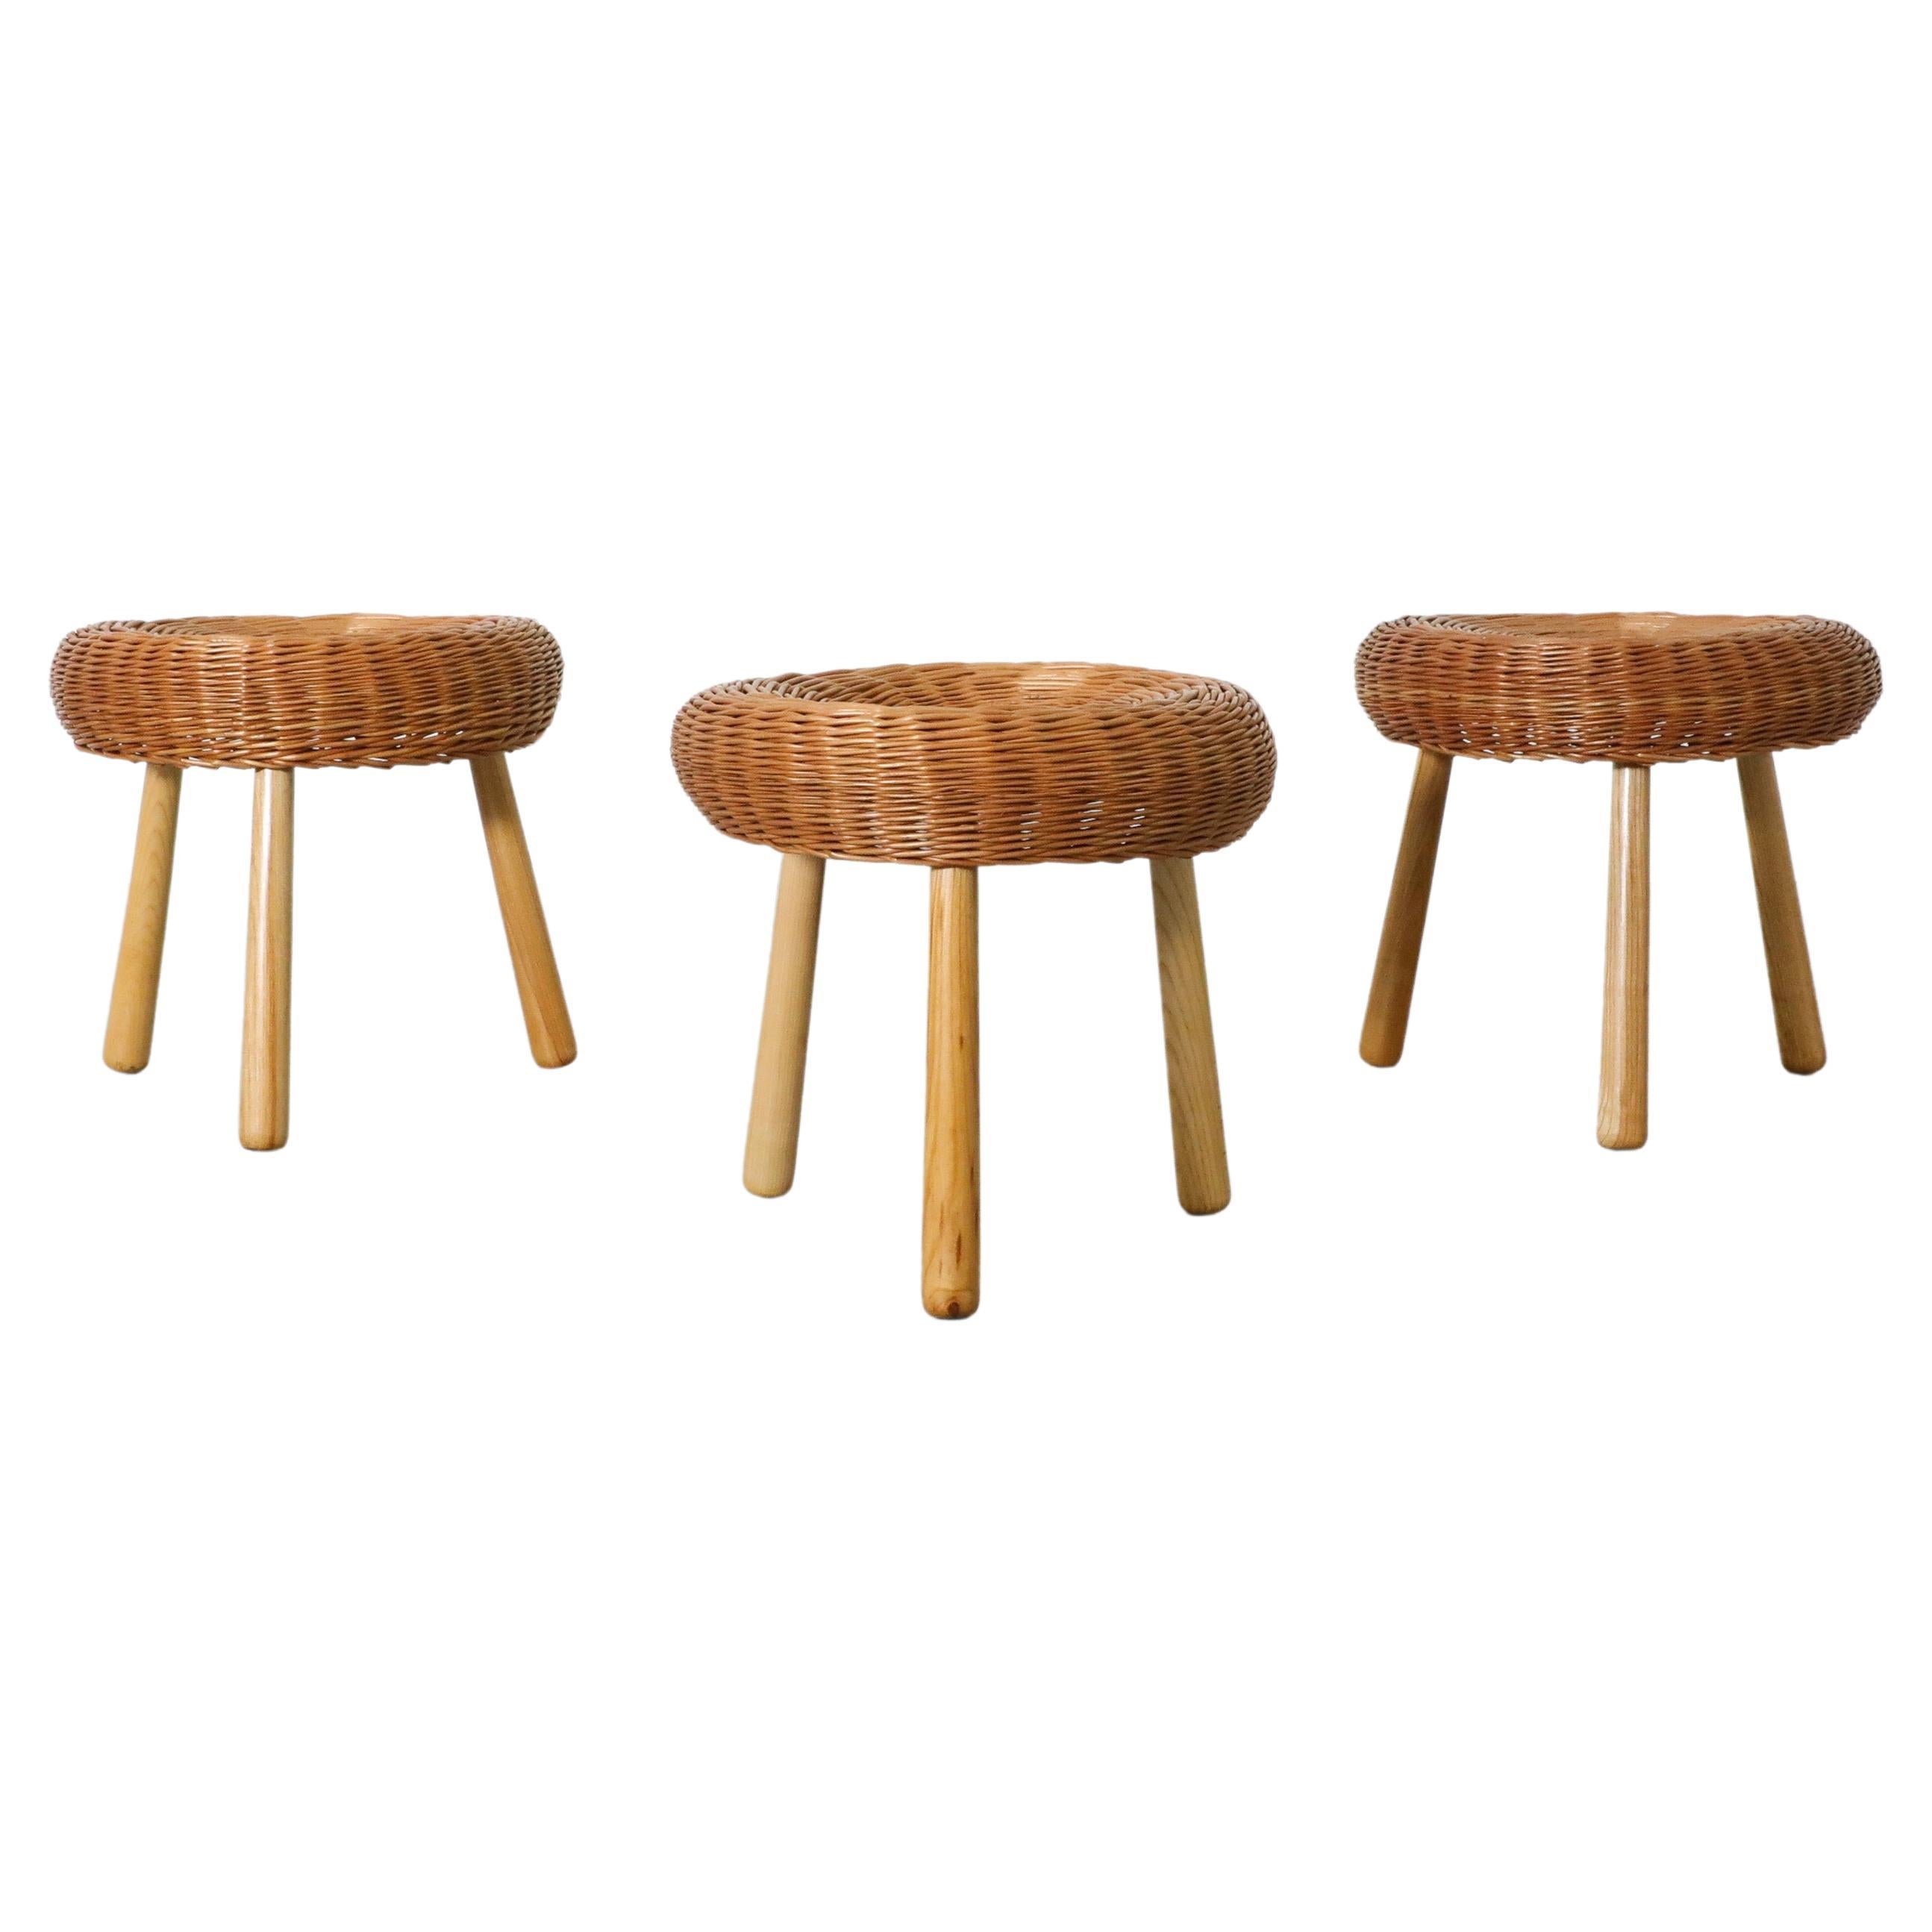 Tony Paul Attributed Woven Rattan Tripod Stools with Tapered Solid Wood Legs